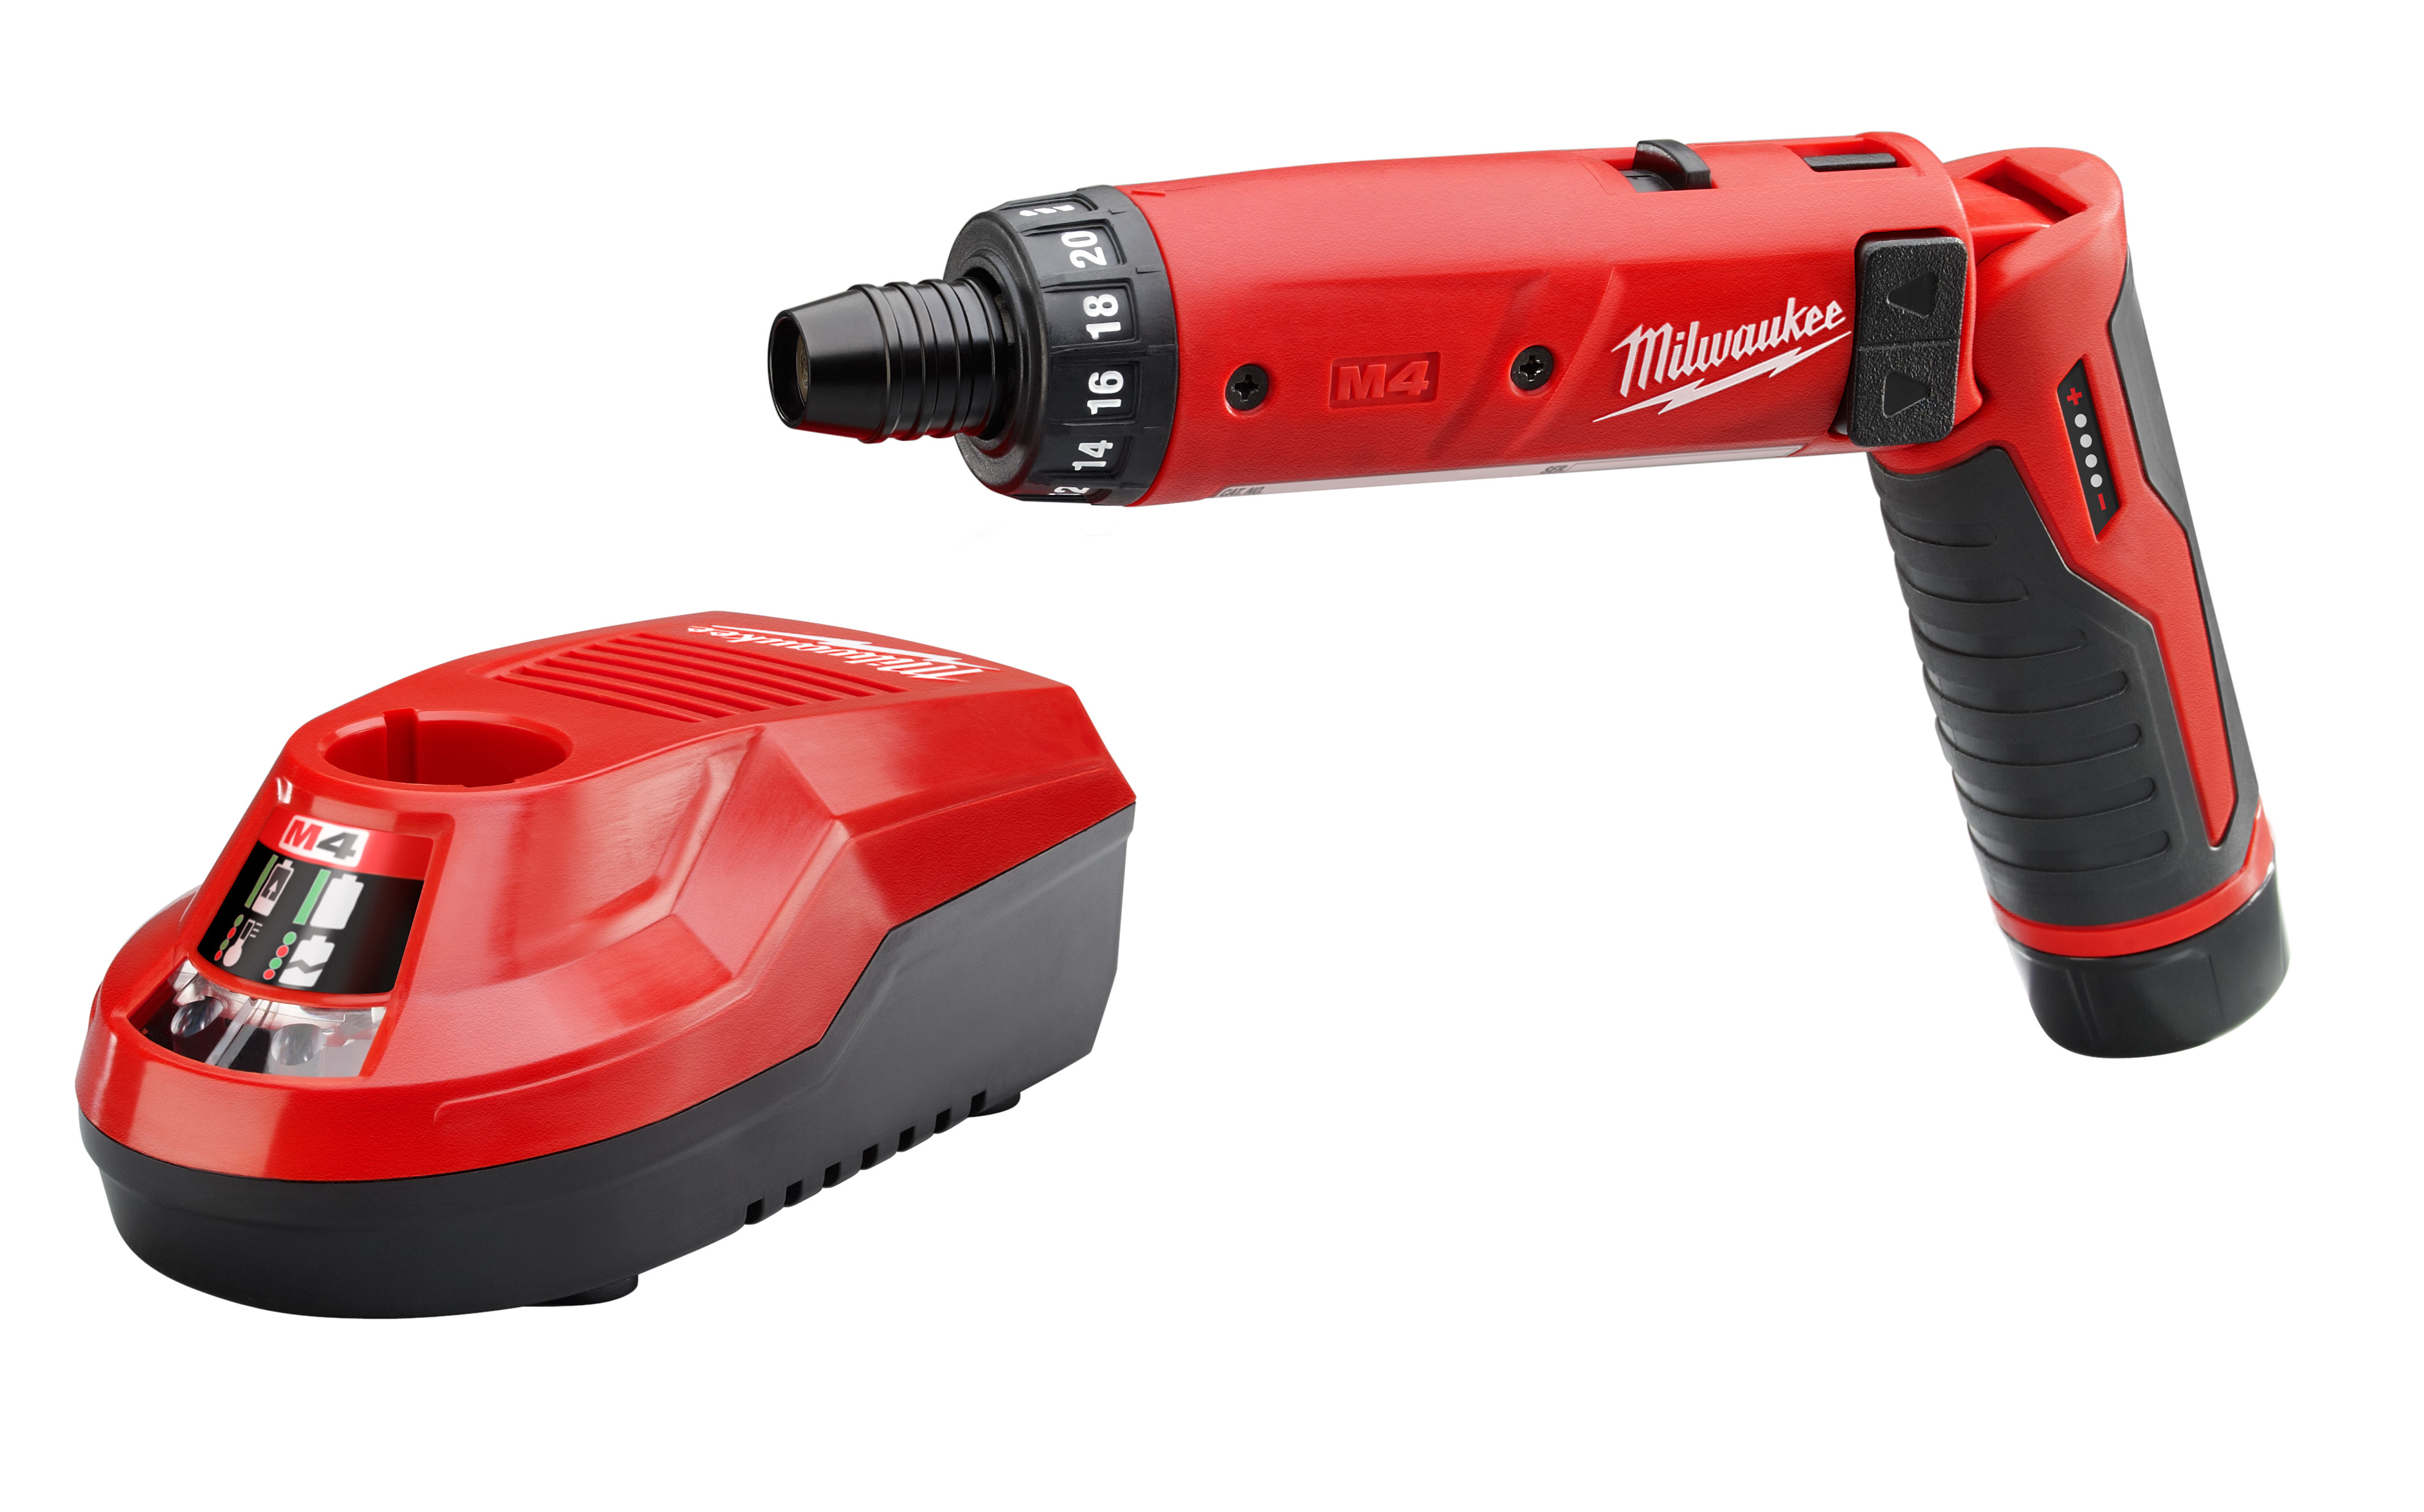 With the introduction of the new M4™ 2-speed screwdriver, Milwaukee Tool commits to a new line of cordless products in the 4 V category utilizing the company’s REDLITHIUM 2.0 battery technology. The new screwdriver incorporates the latest Milwaukee core technologies in motor, REDLITHIUM™ intelligence electronics and REDLITHIUM 2.0 batteries, increasing the tool’s power and run-time, while shrinking its size. Featuring 44 in-lbs of peak torque and a 21-position clutch with auto shut-off, the new screwdriver offers improved torque control during repetitive applications. Two speeds, 200 and 600 RPM, offer further user control for precision work. At only 244 millimeters in length and under one pound, the M4™ screwdriver is easy to use with one hand, featuring 1/4 in. quick-change chuck for one-handed bit changes.